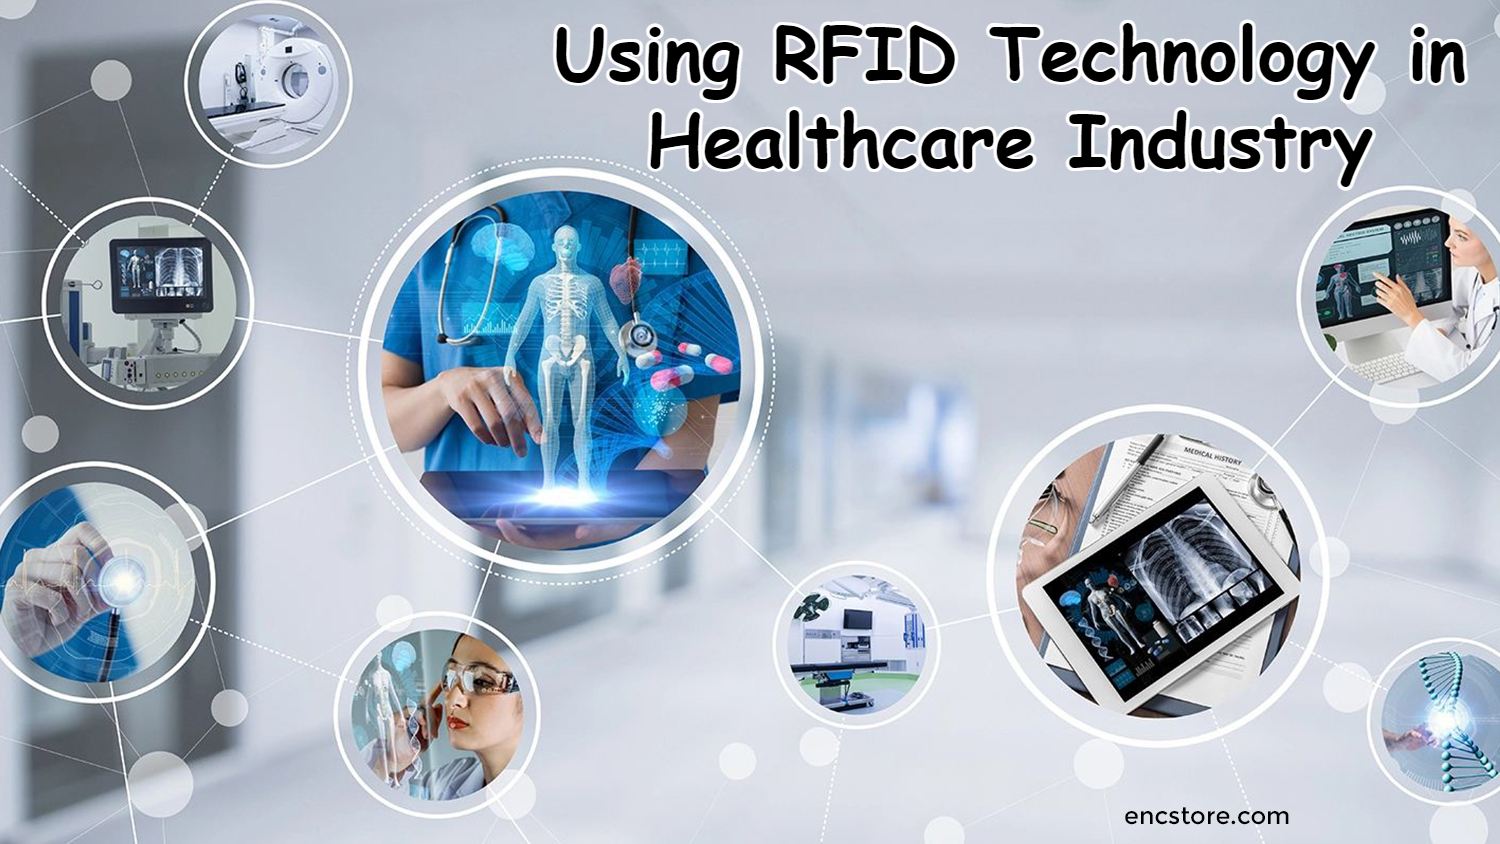 Using RFID Technology in Healthcare Industry